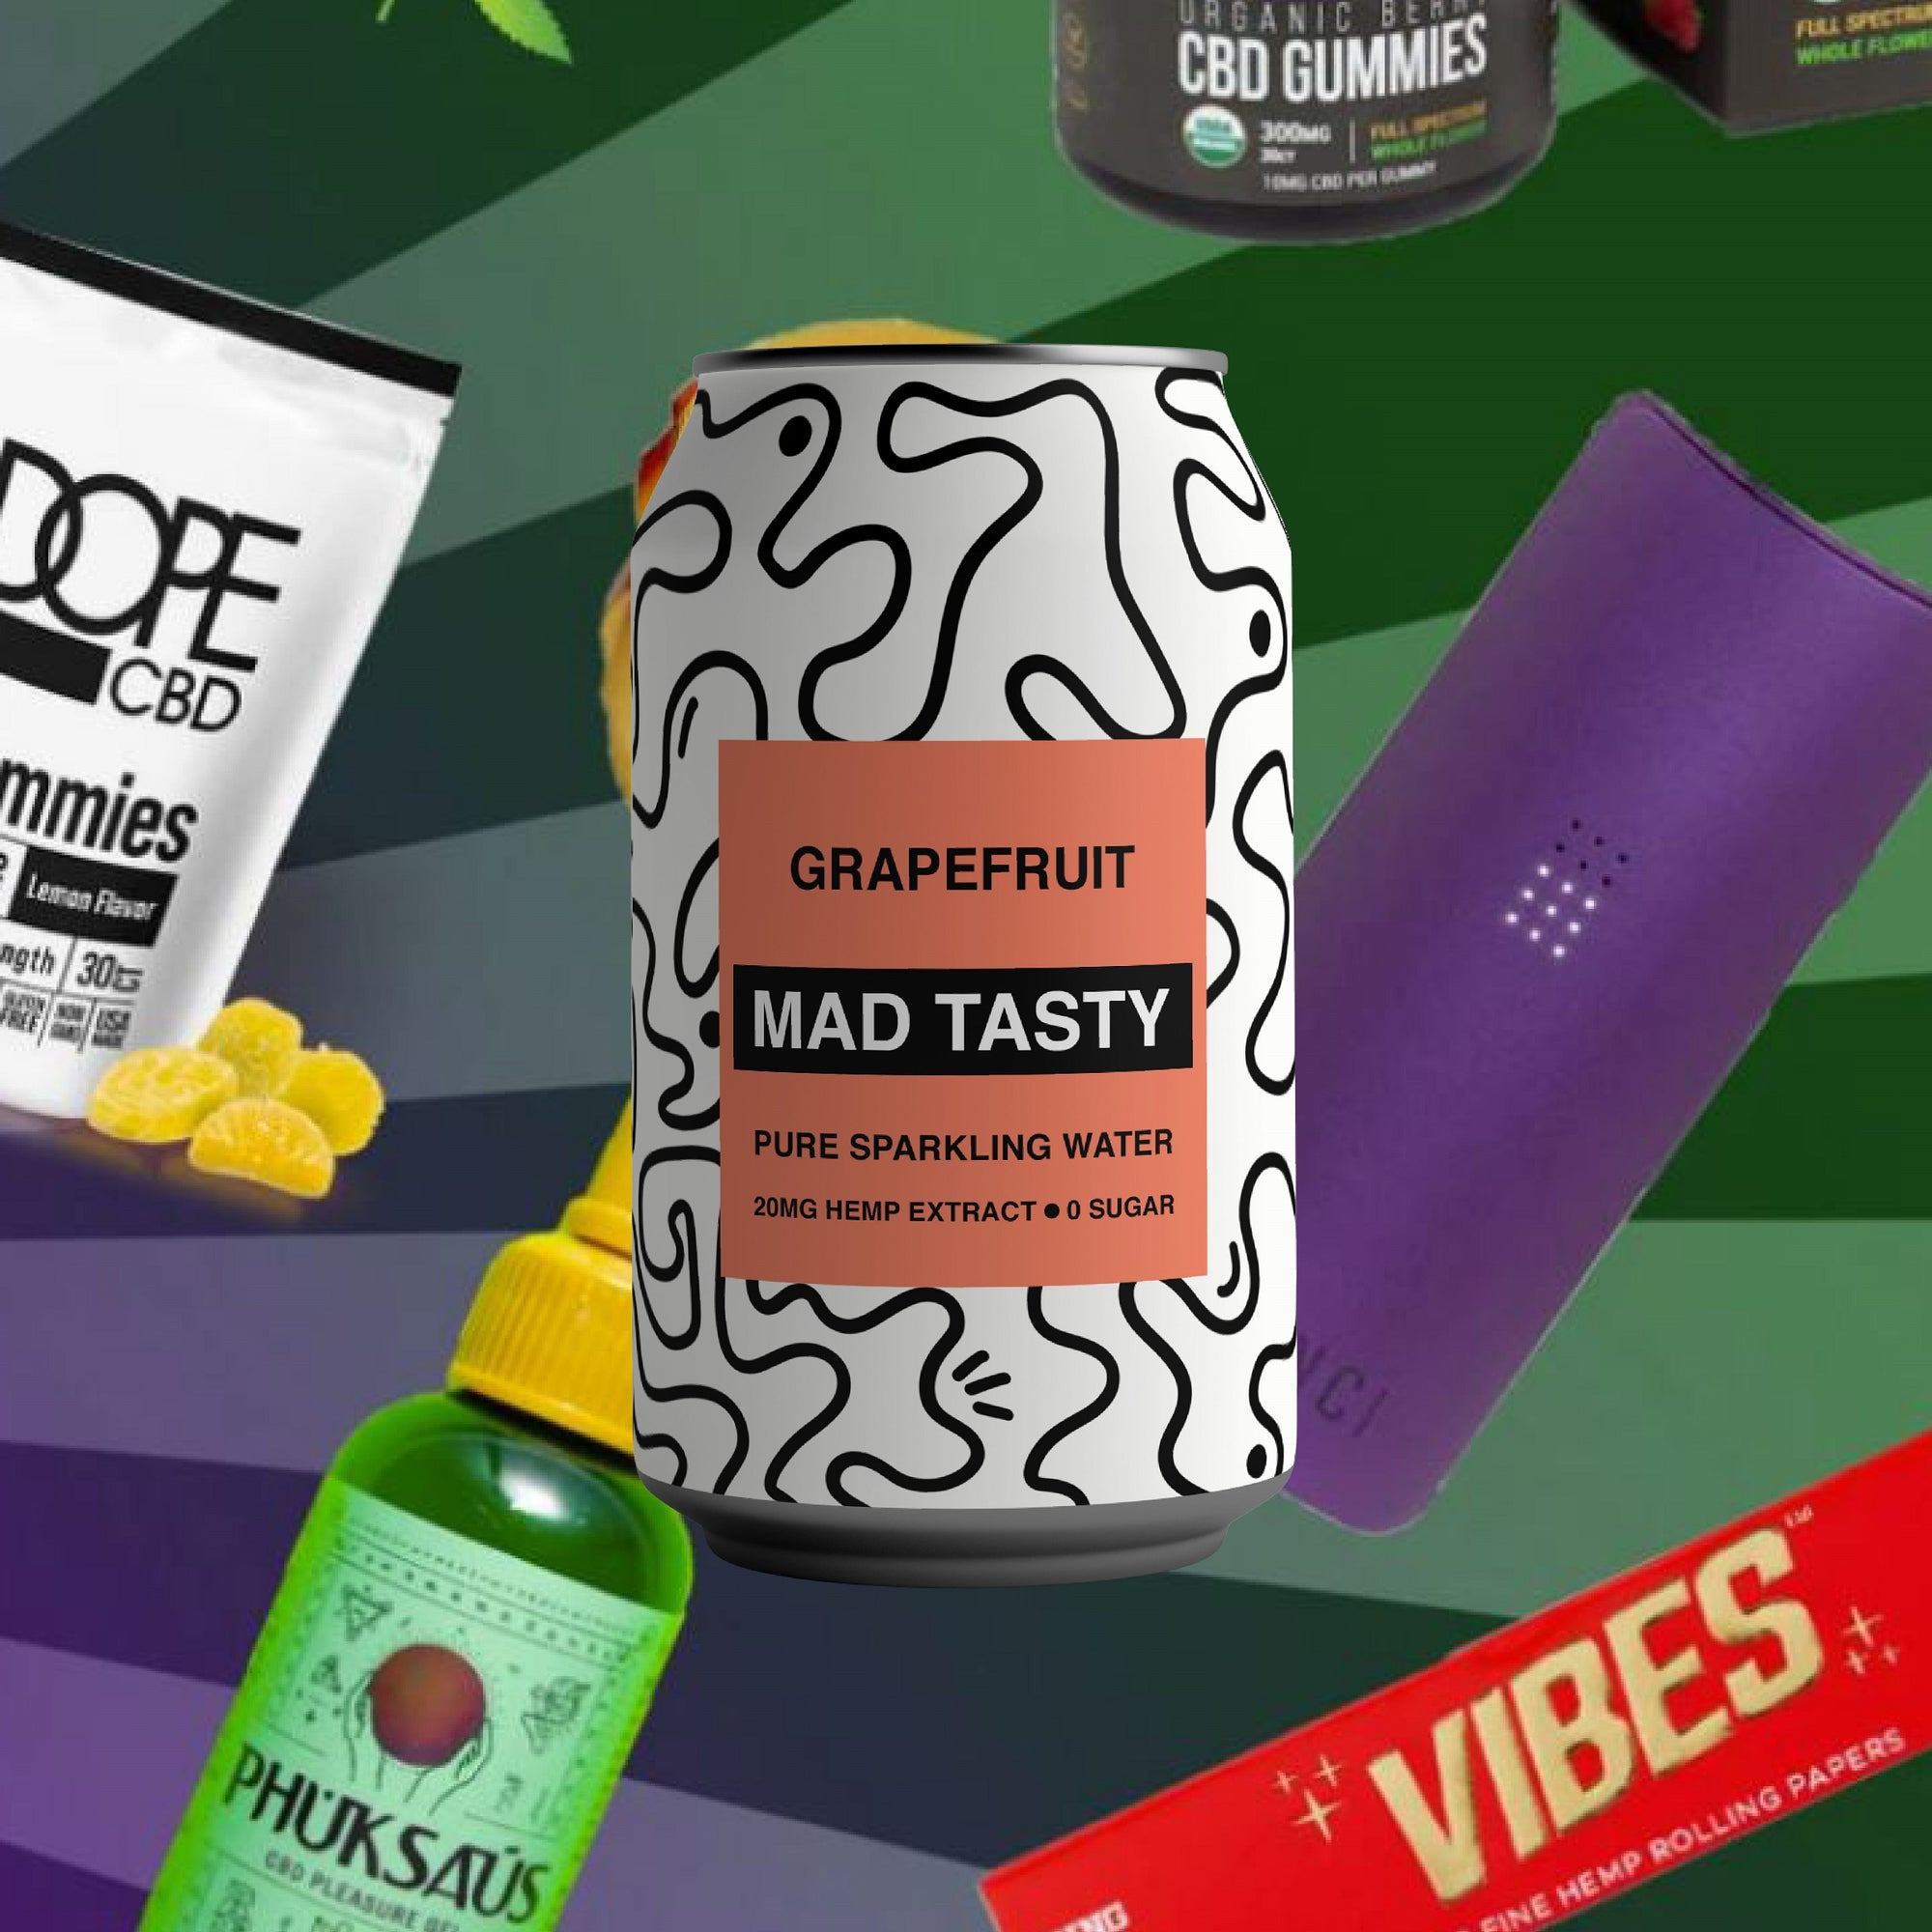 The Best 4/20 Deals and Sales, From CBD to Legal Joints to Lube